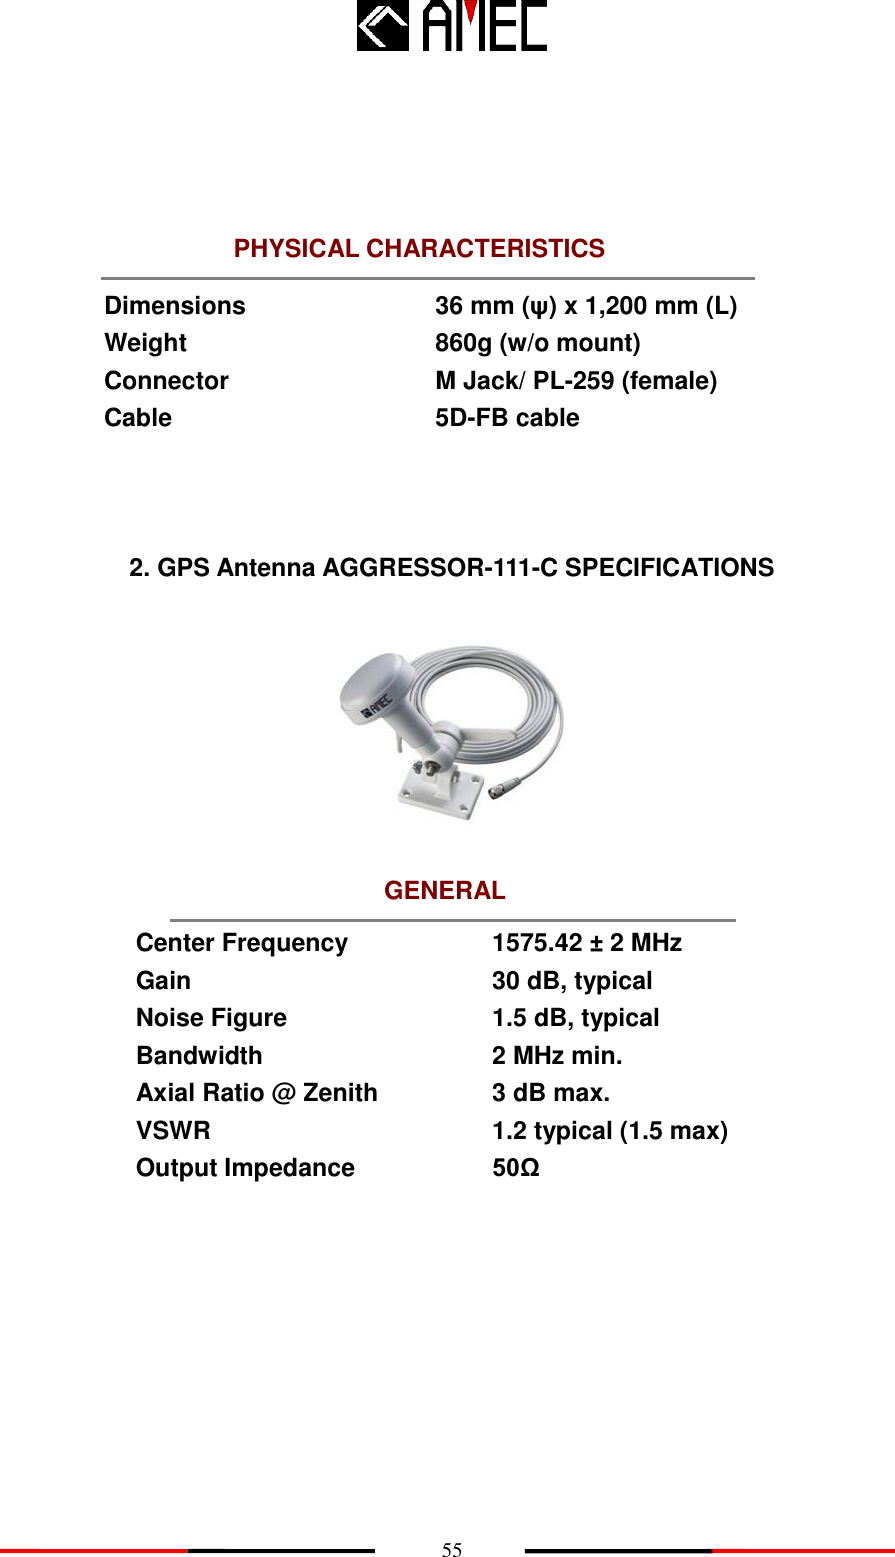    55 PHYSICAL CHARACTERISTICS GENERAL      Dimensions 36 mm (ψ) x 1,200 mm (L) Weight 860g (w/o mount) Connector M Jack/ PL-259 (female) Cable 5D-FB cable     2. GPS Antenna AGGRESSOR-111-C SPECIFICATIONS     Center Frequency 1575.42 ± 2 MHz Gain 30 dB, typical Noise Figure 1.5 dB, typical Bandwidth 2 MHz min. Axial Ratio @ Zenith 3 dB max. VSWR 1.2 typical (1.5 max) Output Impedance 50Ω  